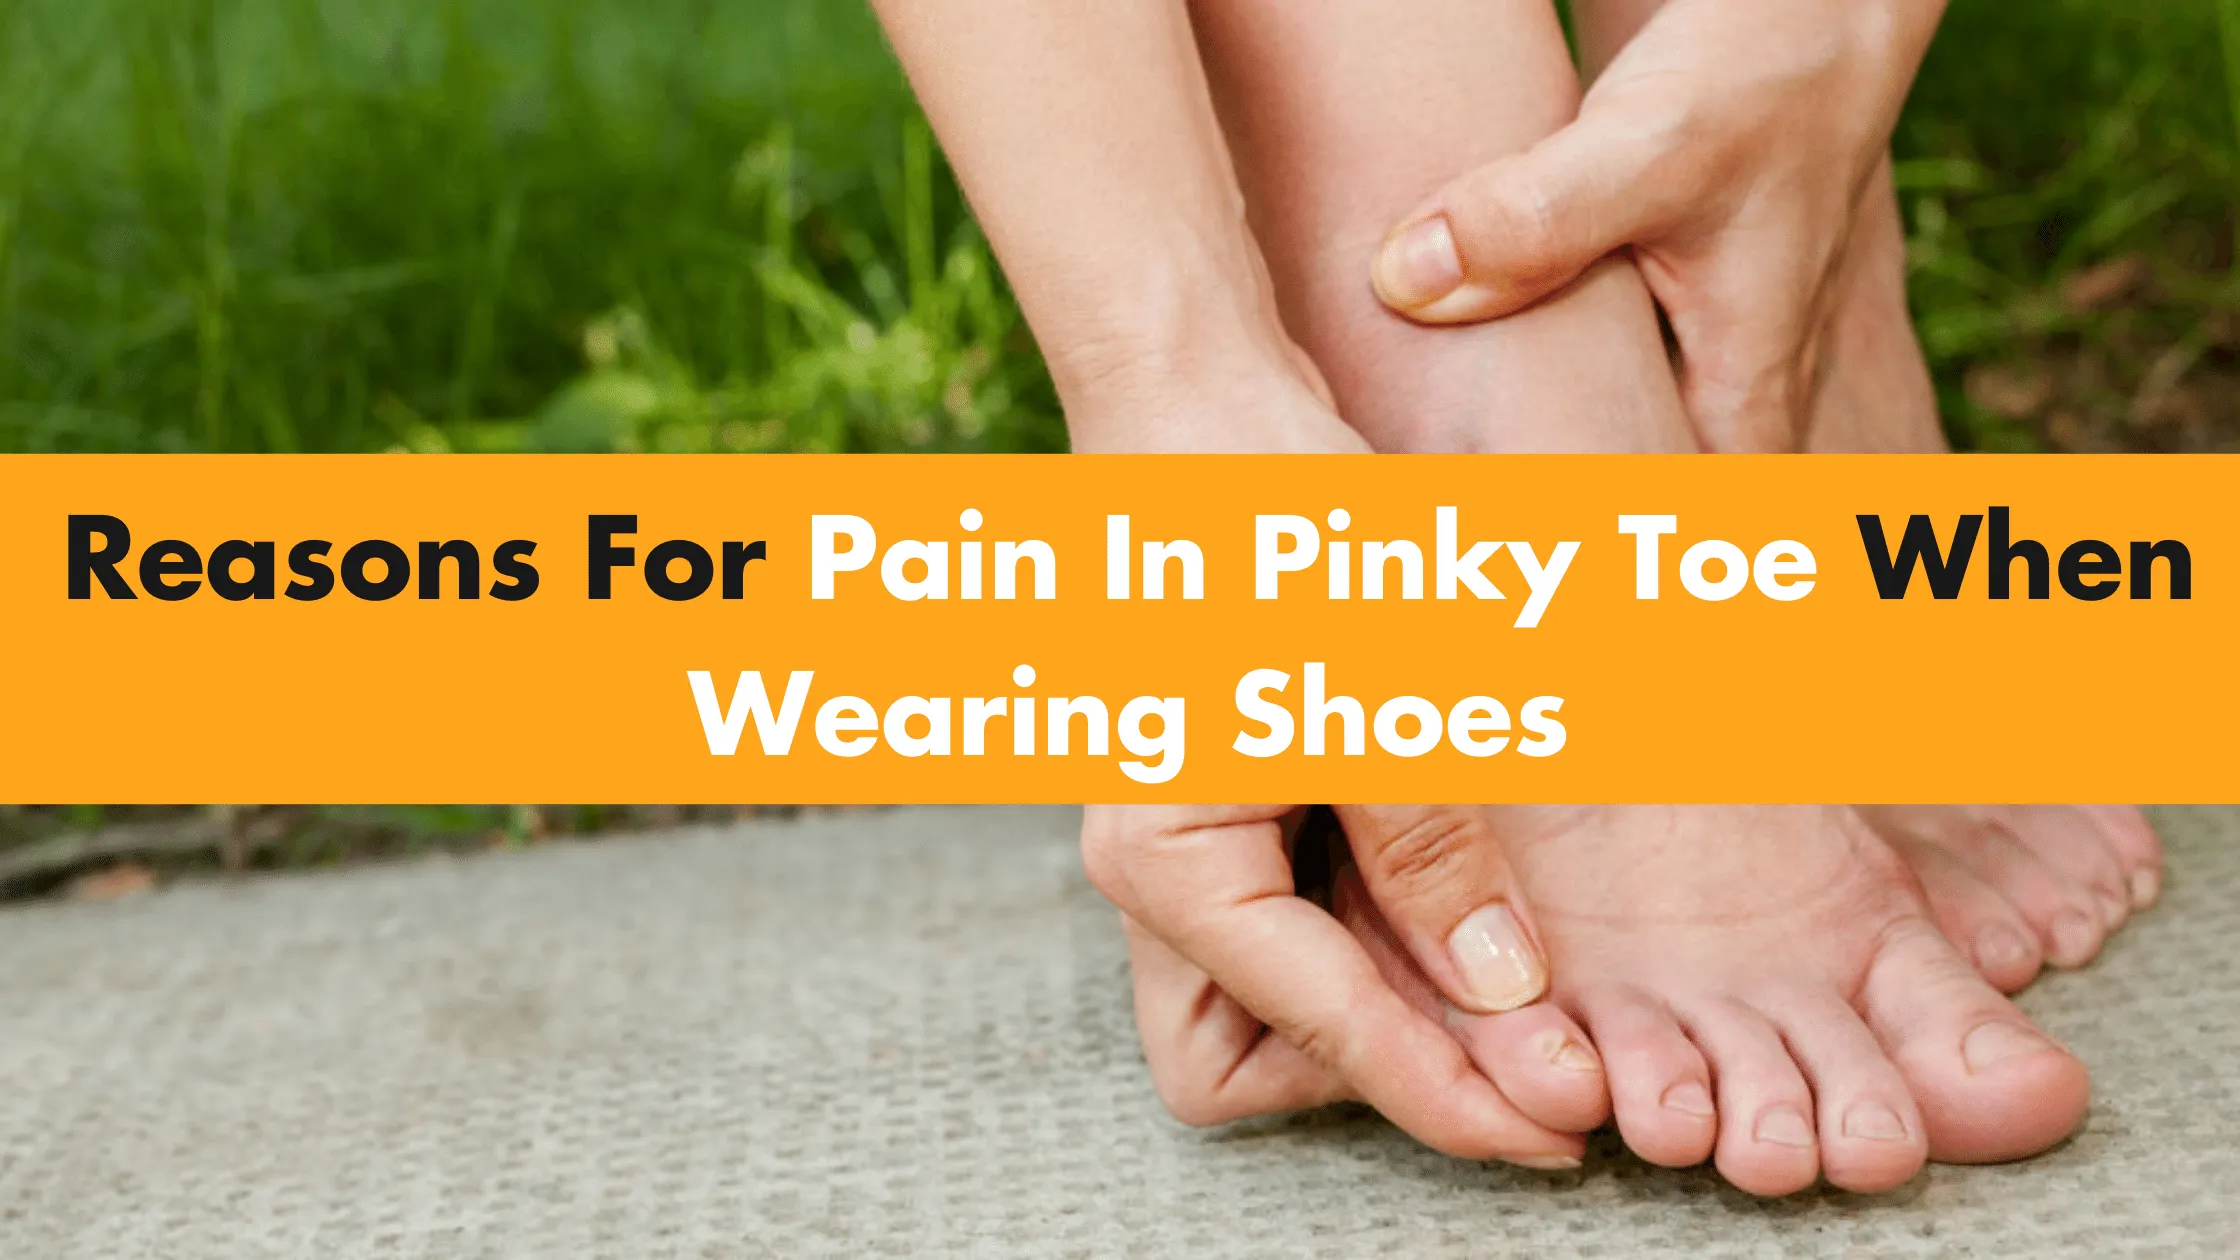 Reasons For Pain In Pinky Toe When Wearing Shoes